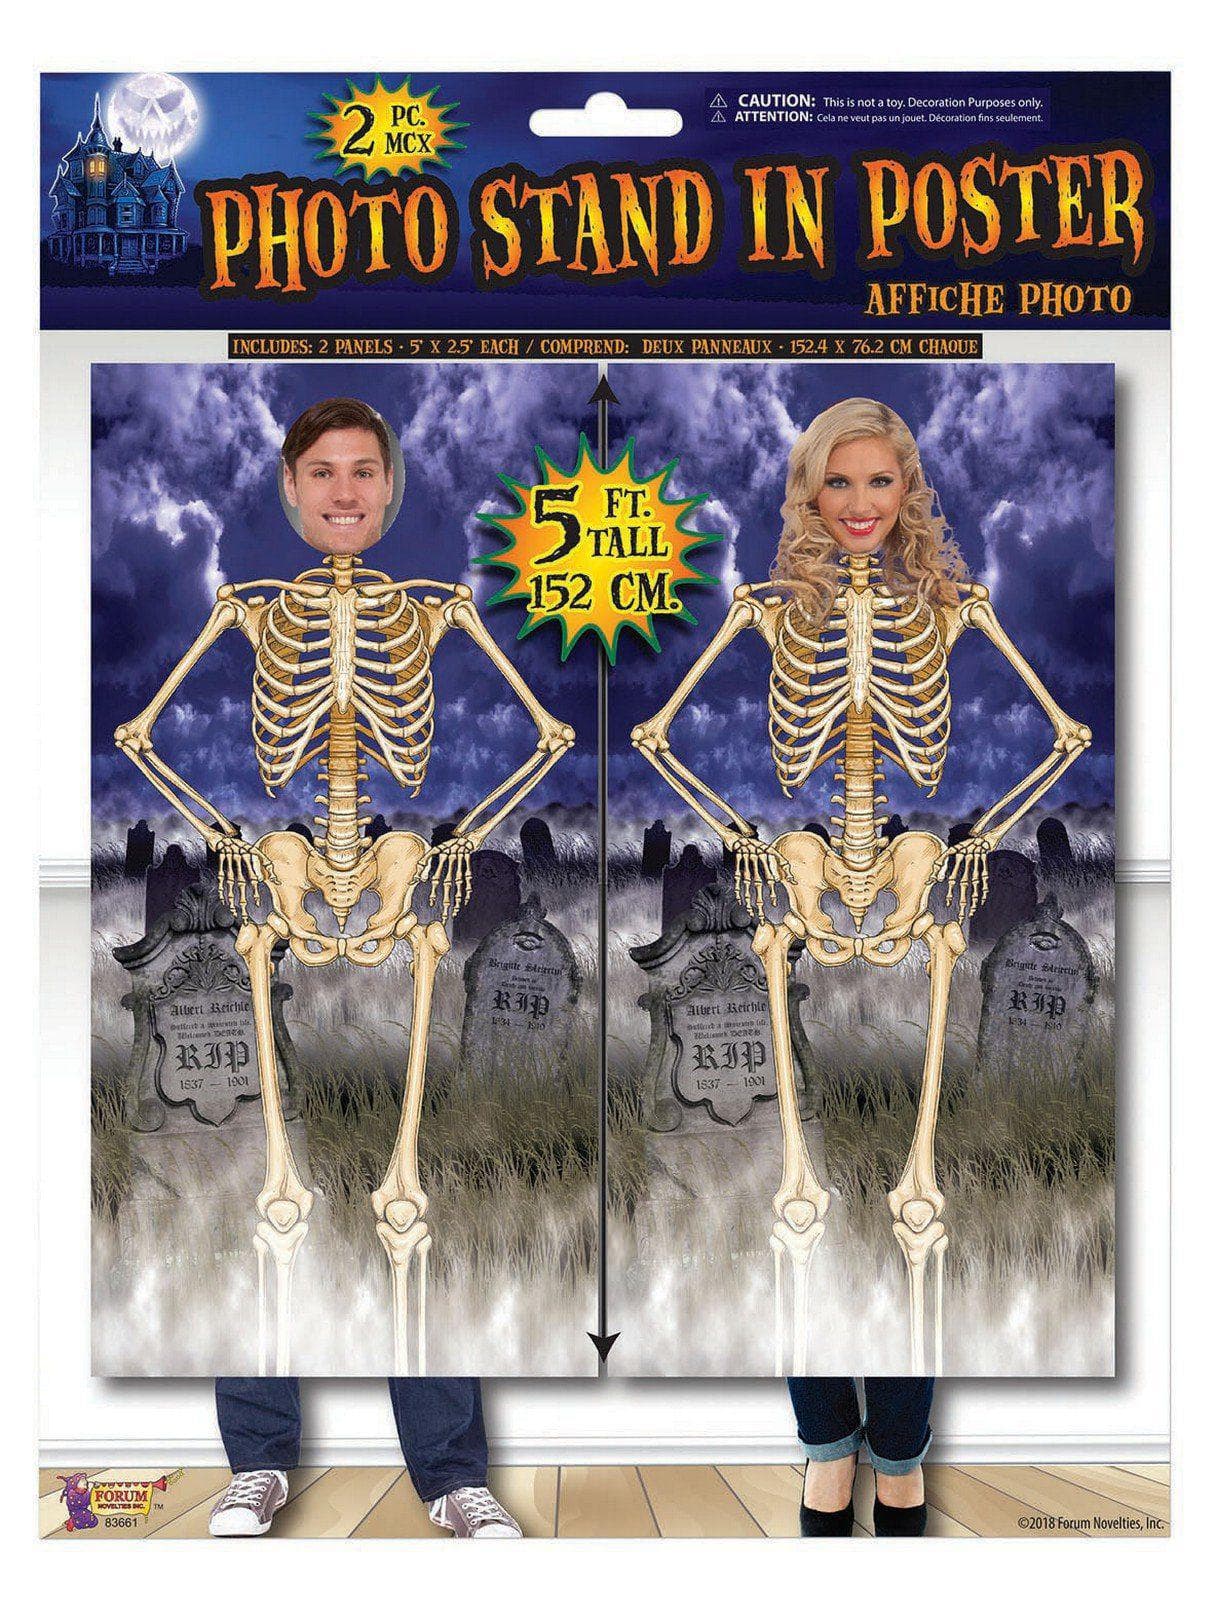 Skeleton Photo Stand-in Poster - costumes.com